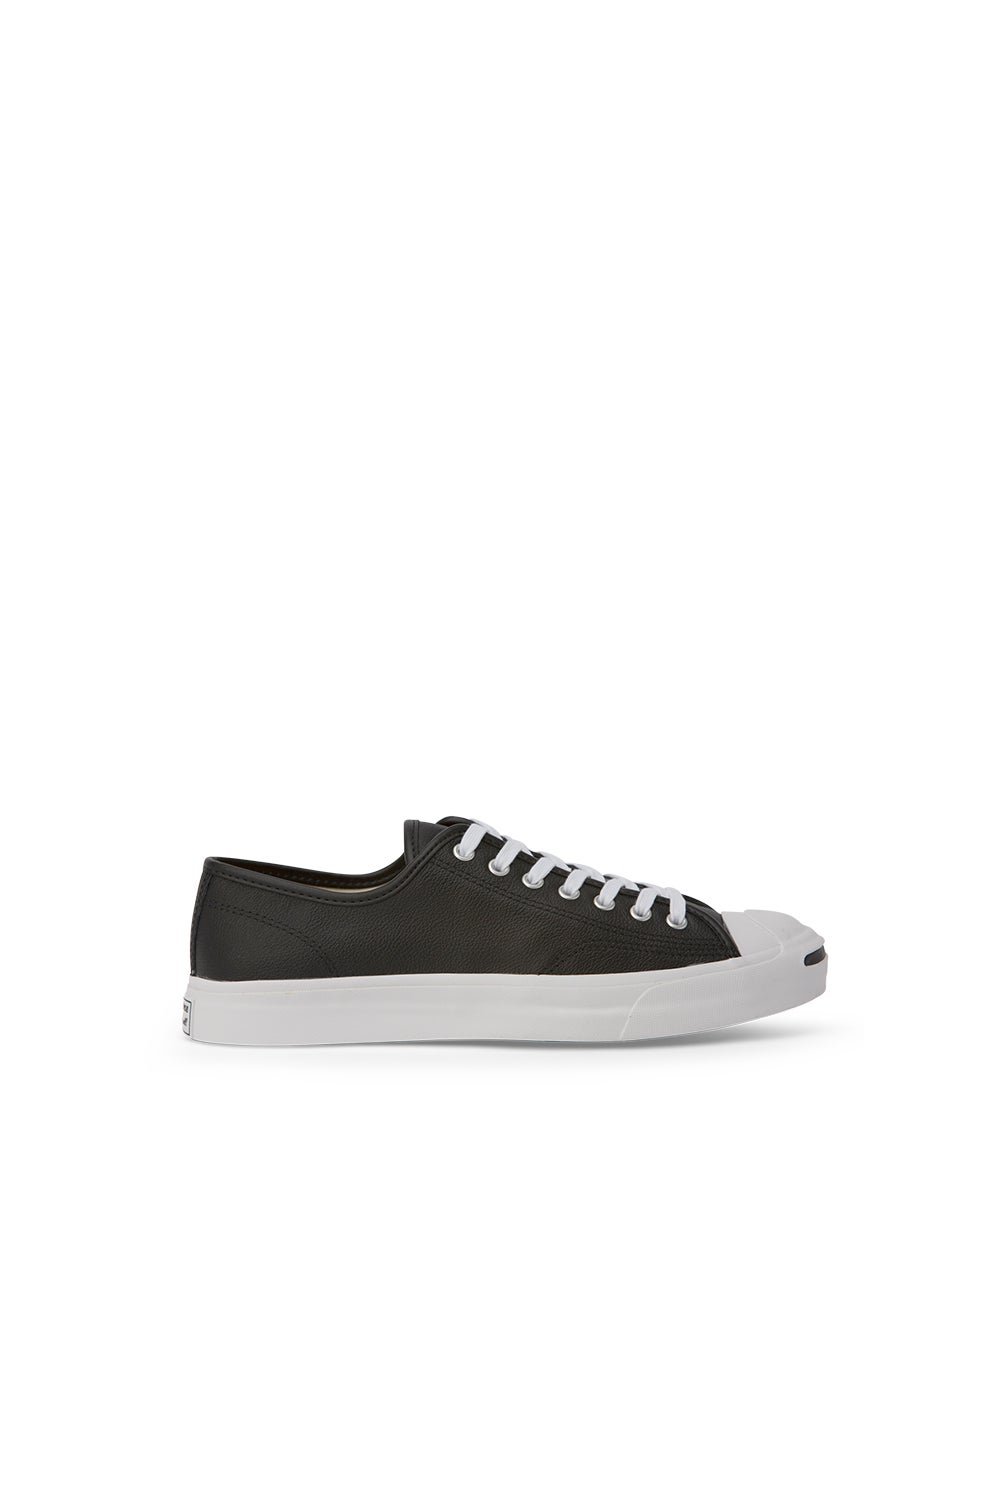 Converse Jack Purcell Foundational Leather Low Top Black